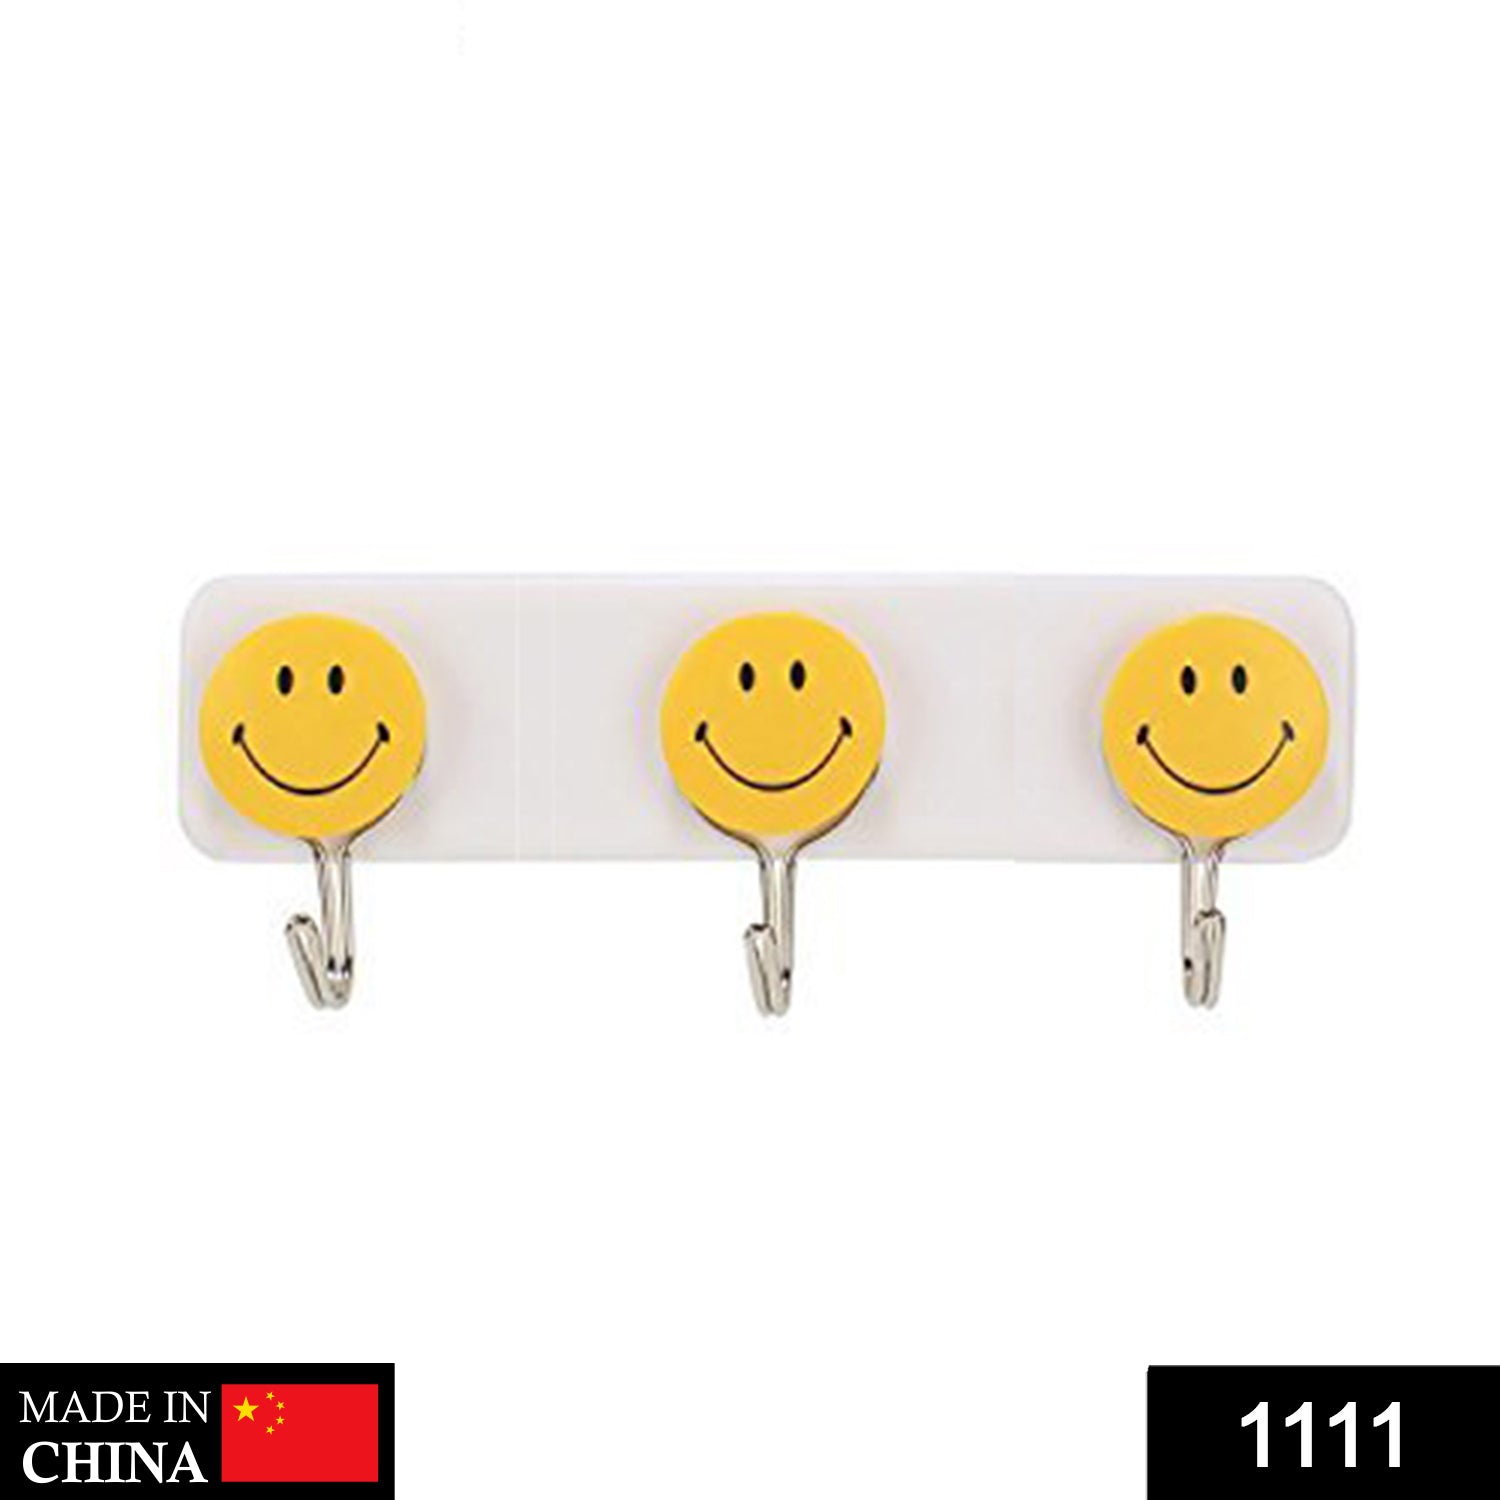 1111 Self Adhesive Smiley Face Wall Hooks (Pack of 3) 